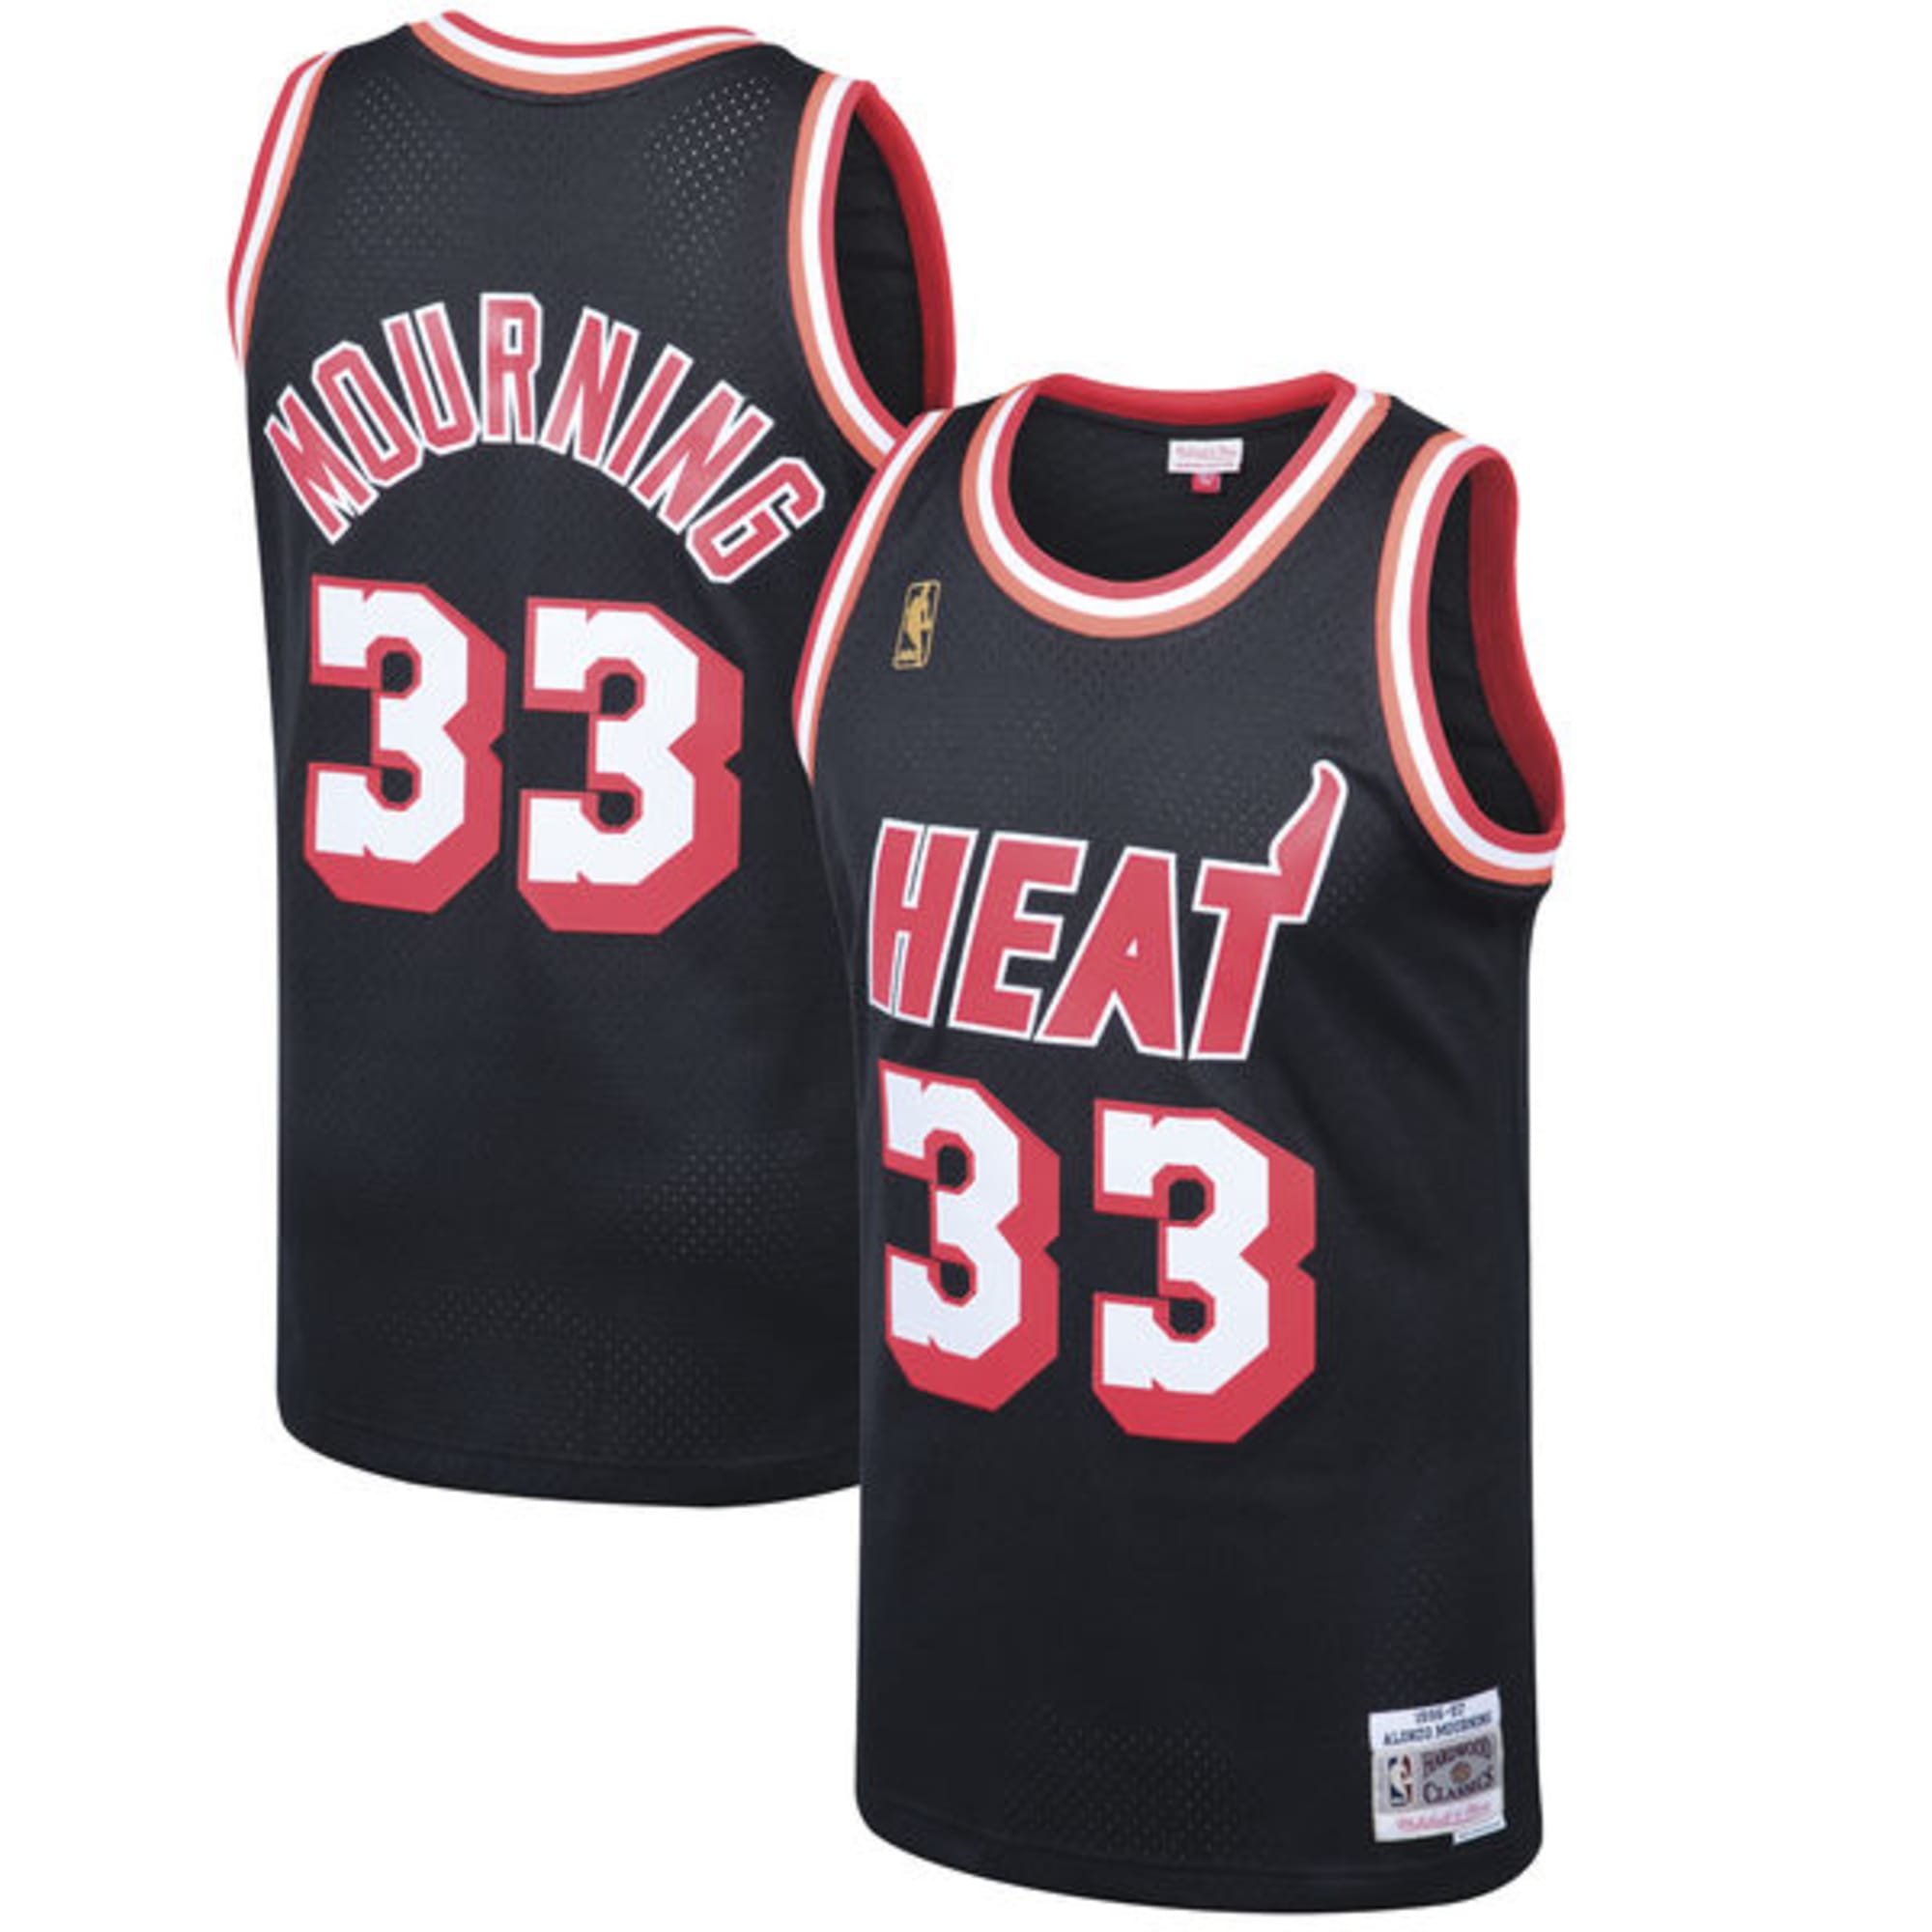 Get your Miami Heat Nike City Edition gear today from Fanatics